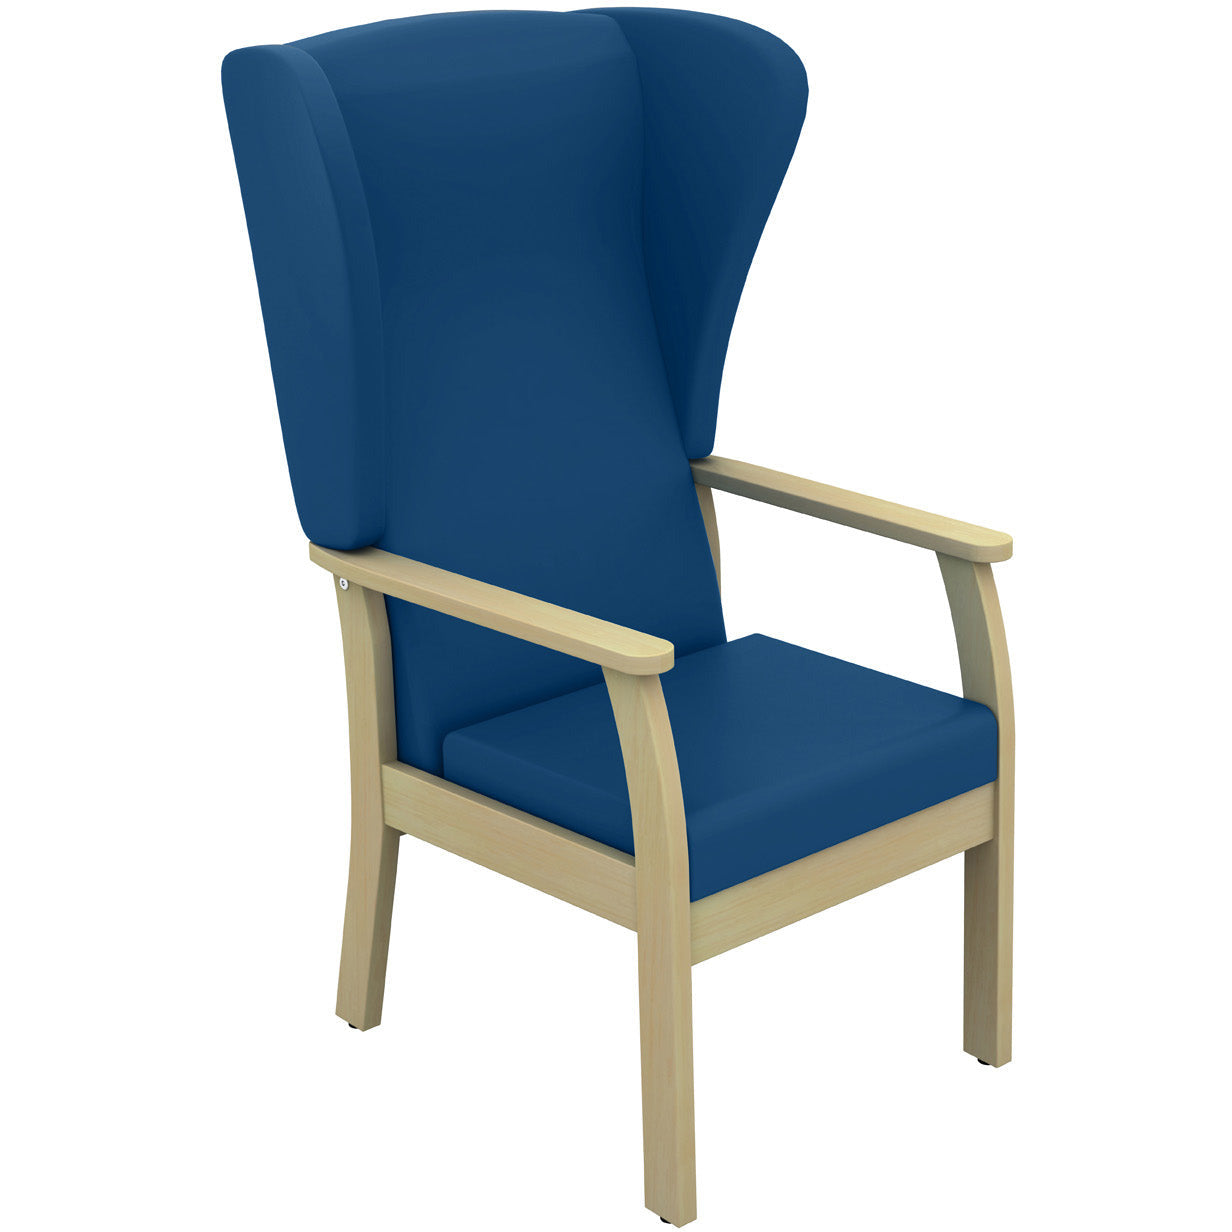 Sunflower Atlas High-Back Patient Chair with Wings - Vinyl Upholstery